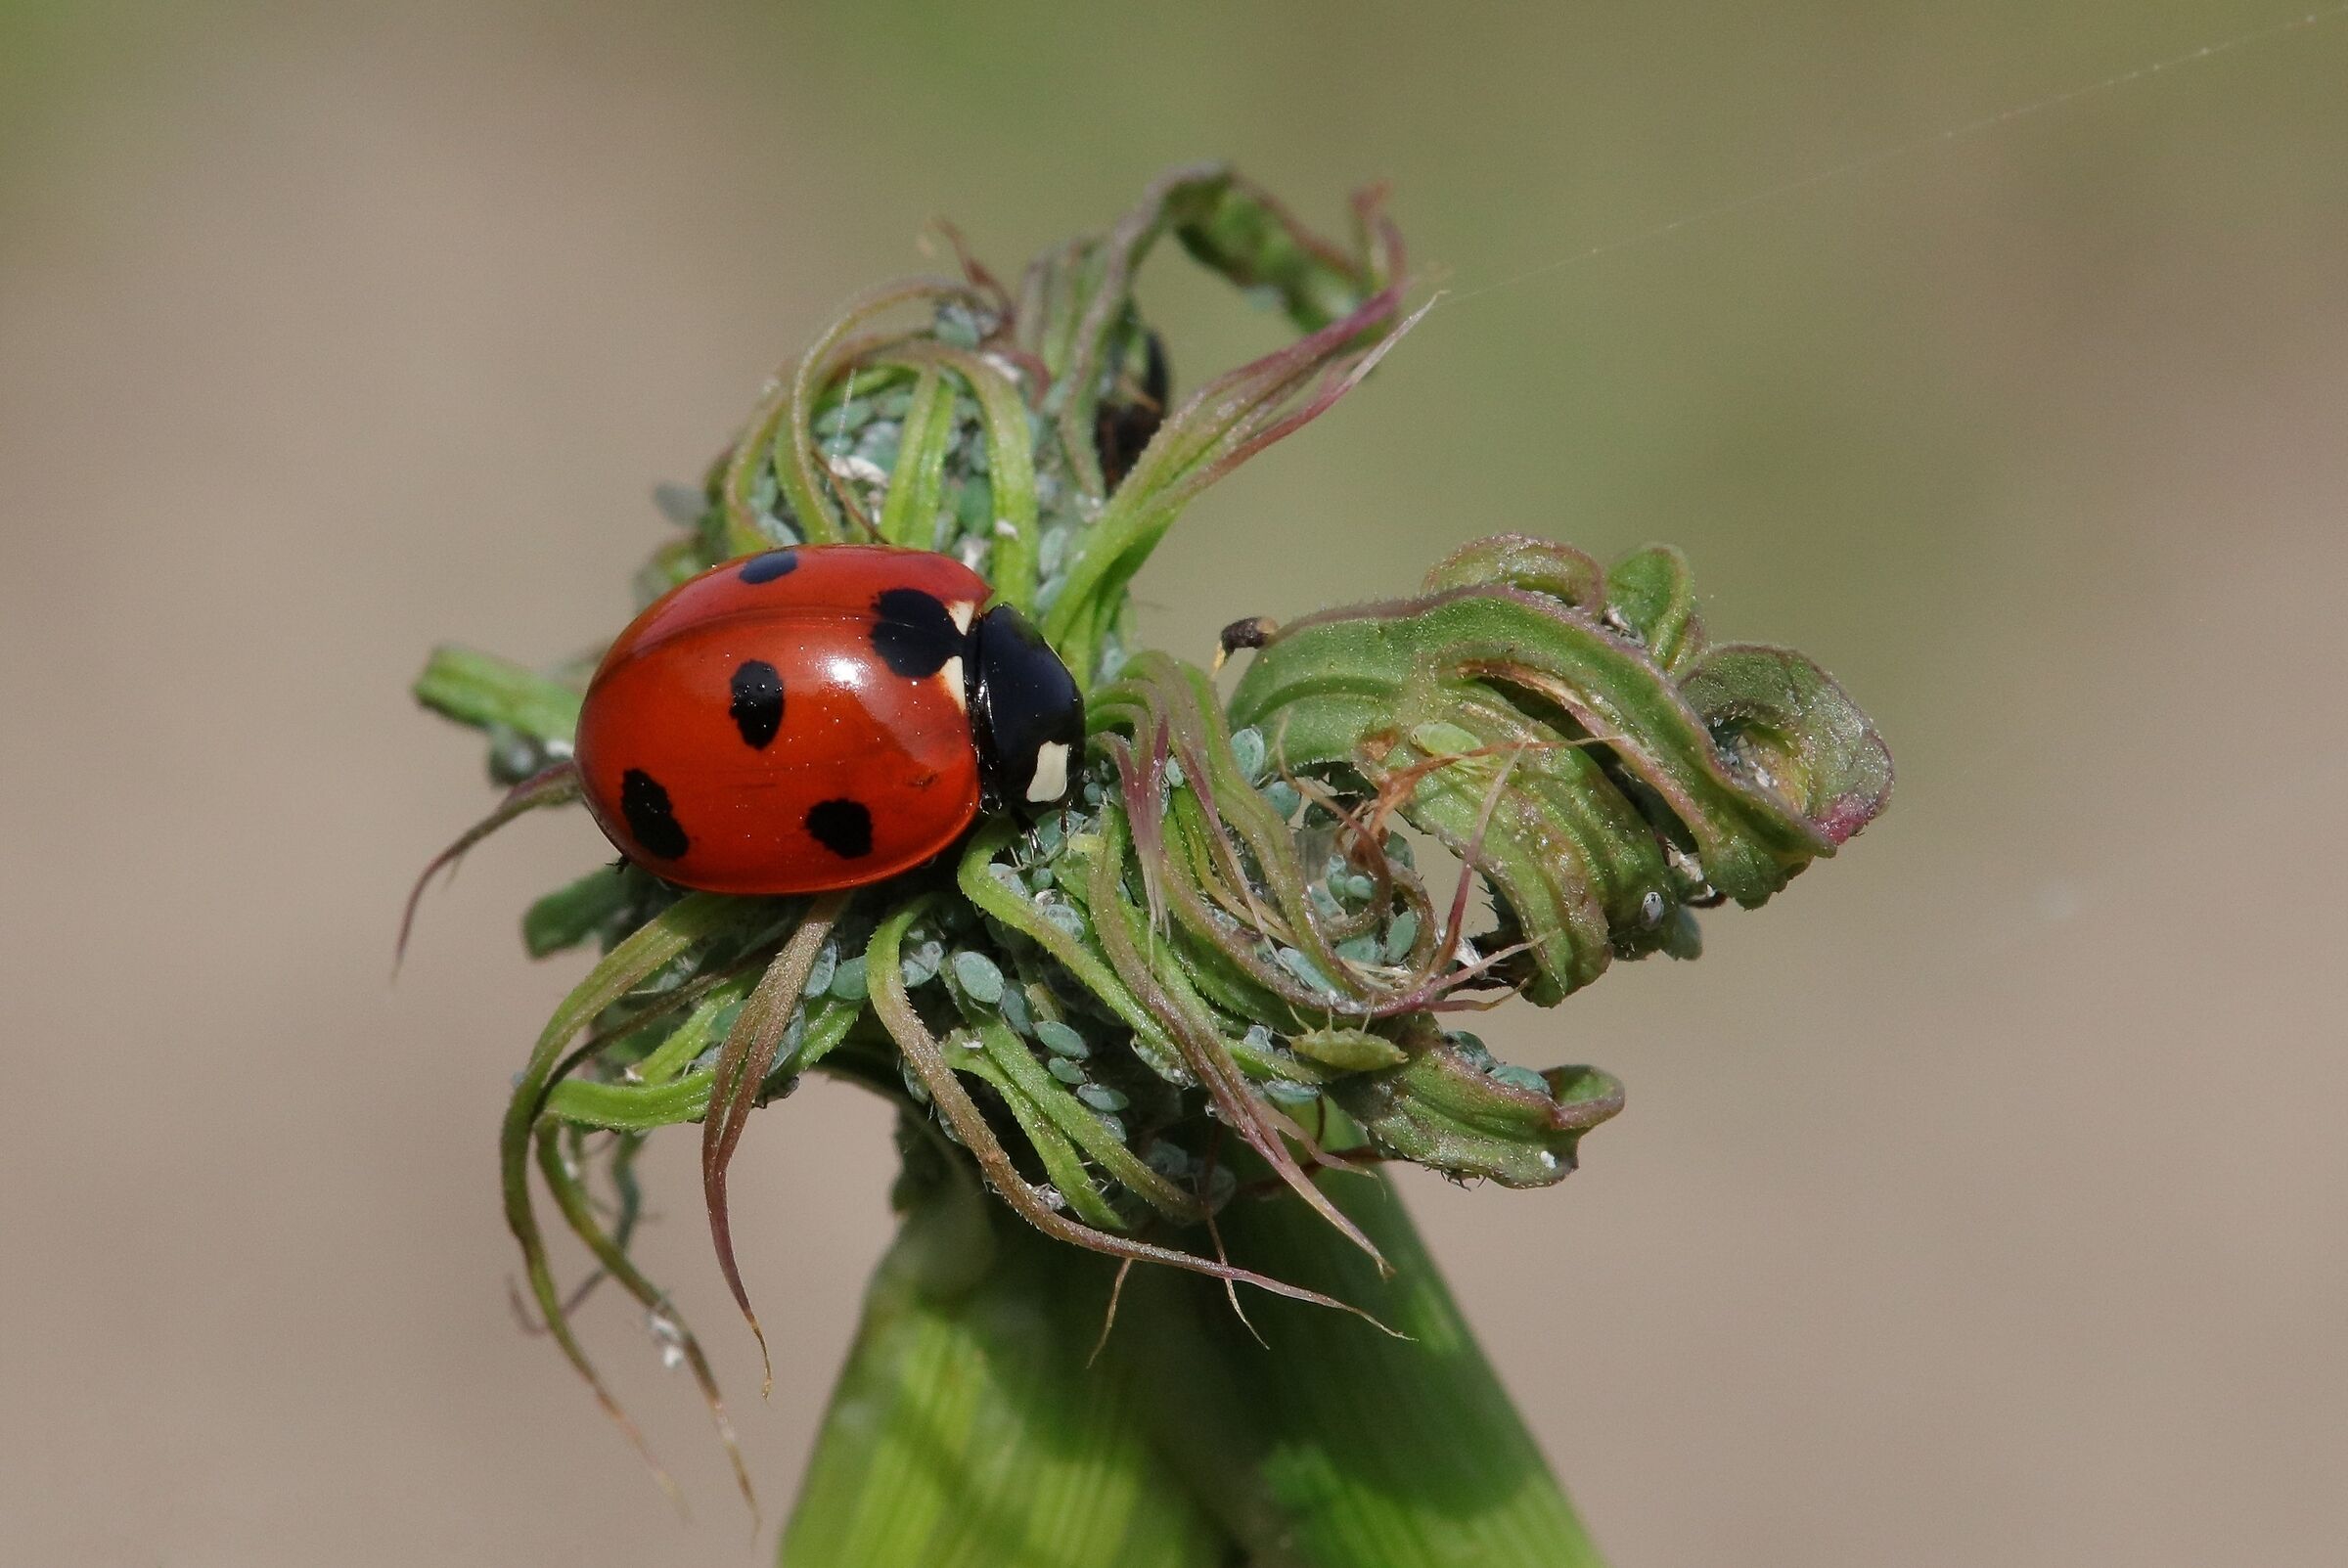 The Lunch of the Ladybug...